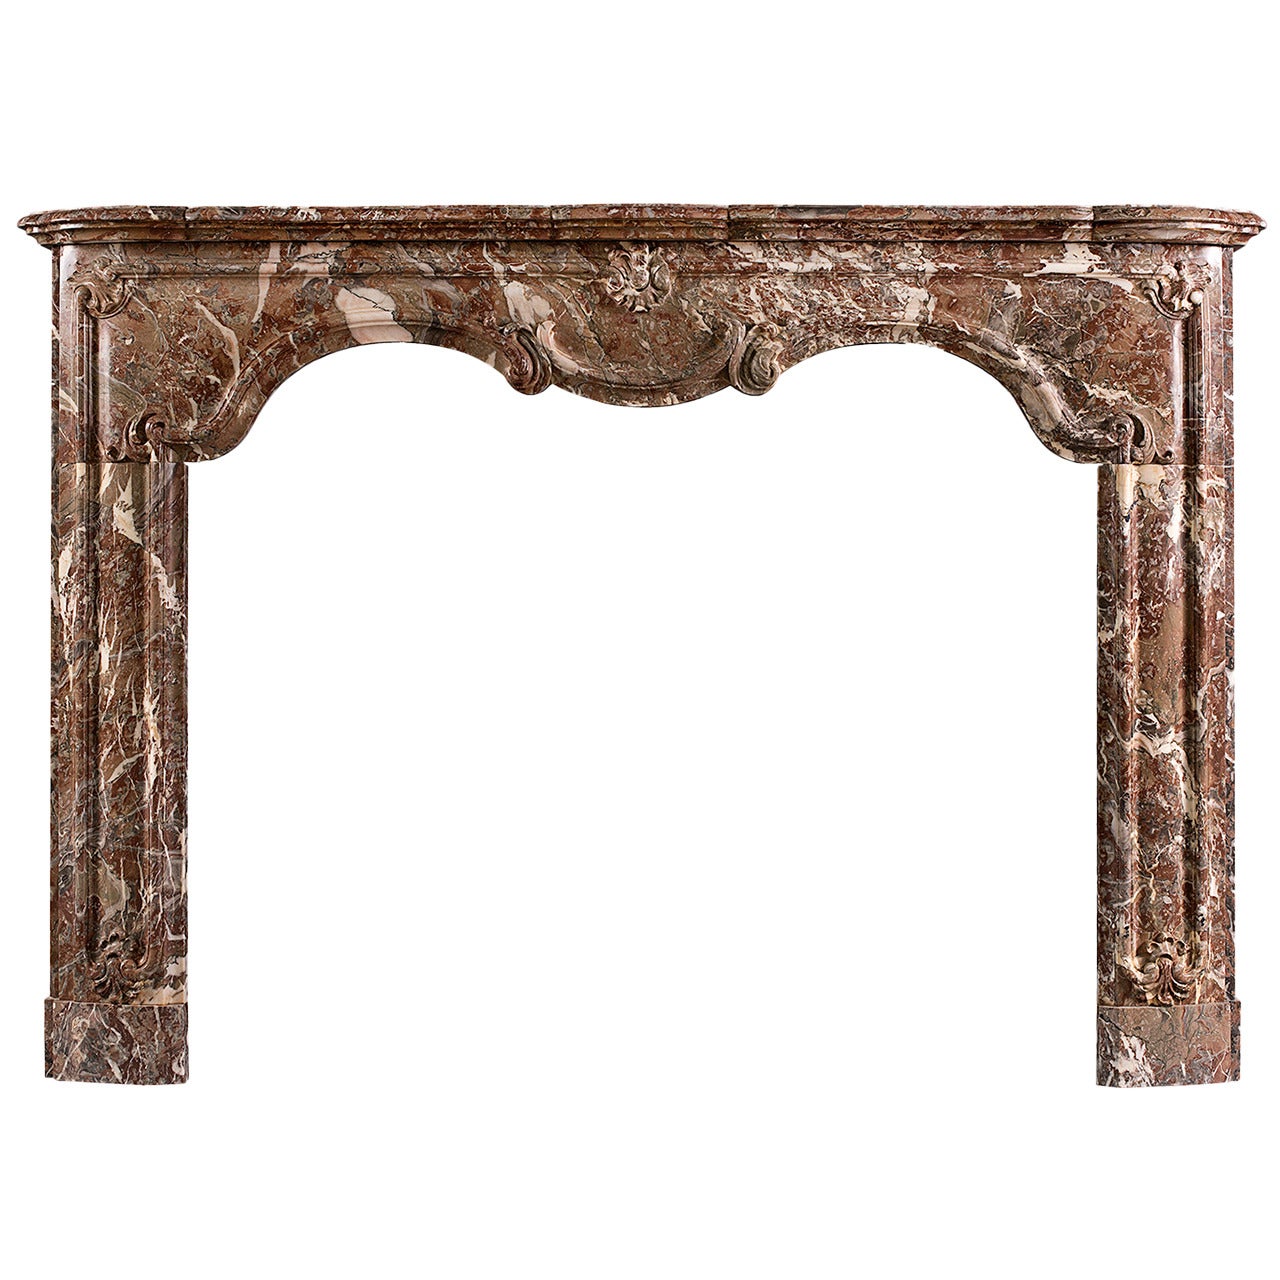 Period Louis XIV/XV Transitional Fireplace in Languedoc Marble